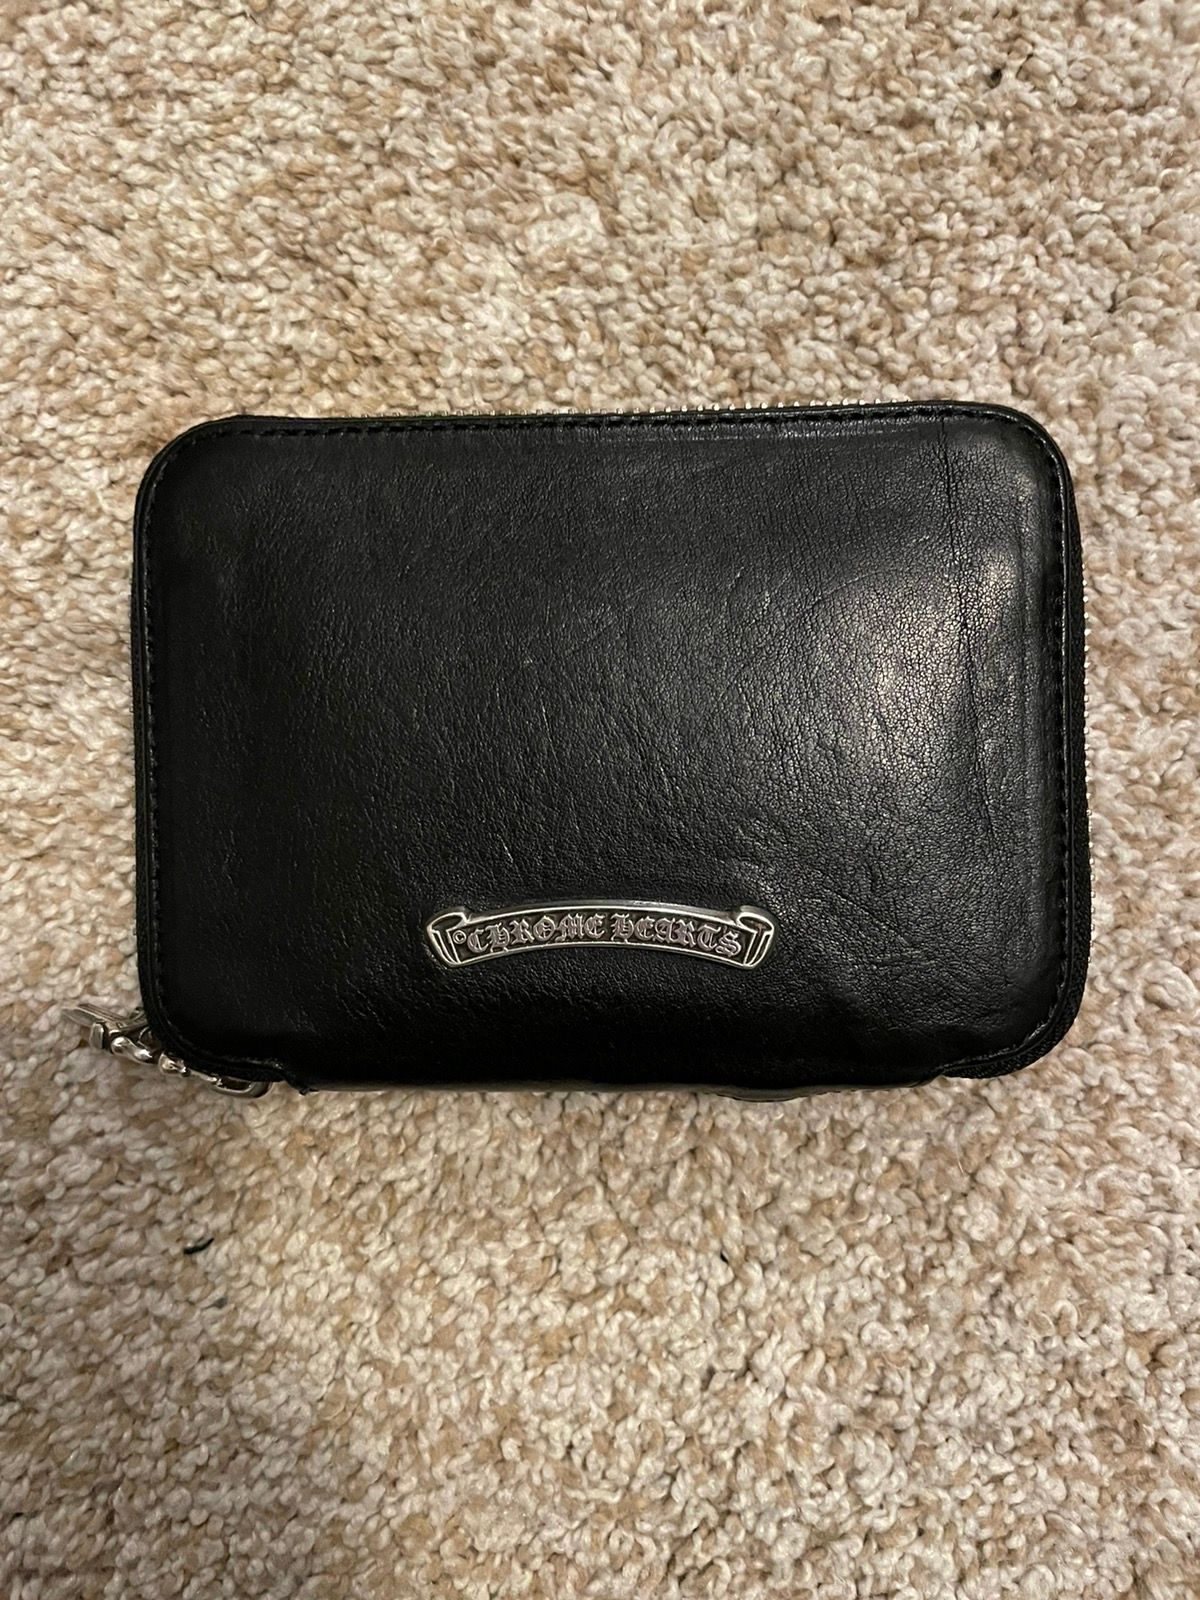 Chrome Hearts Baby Bank Robber Wallet | Grailed